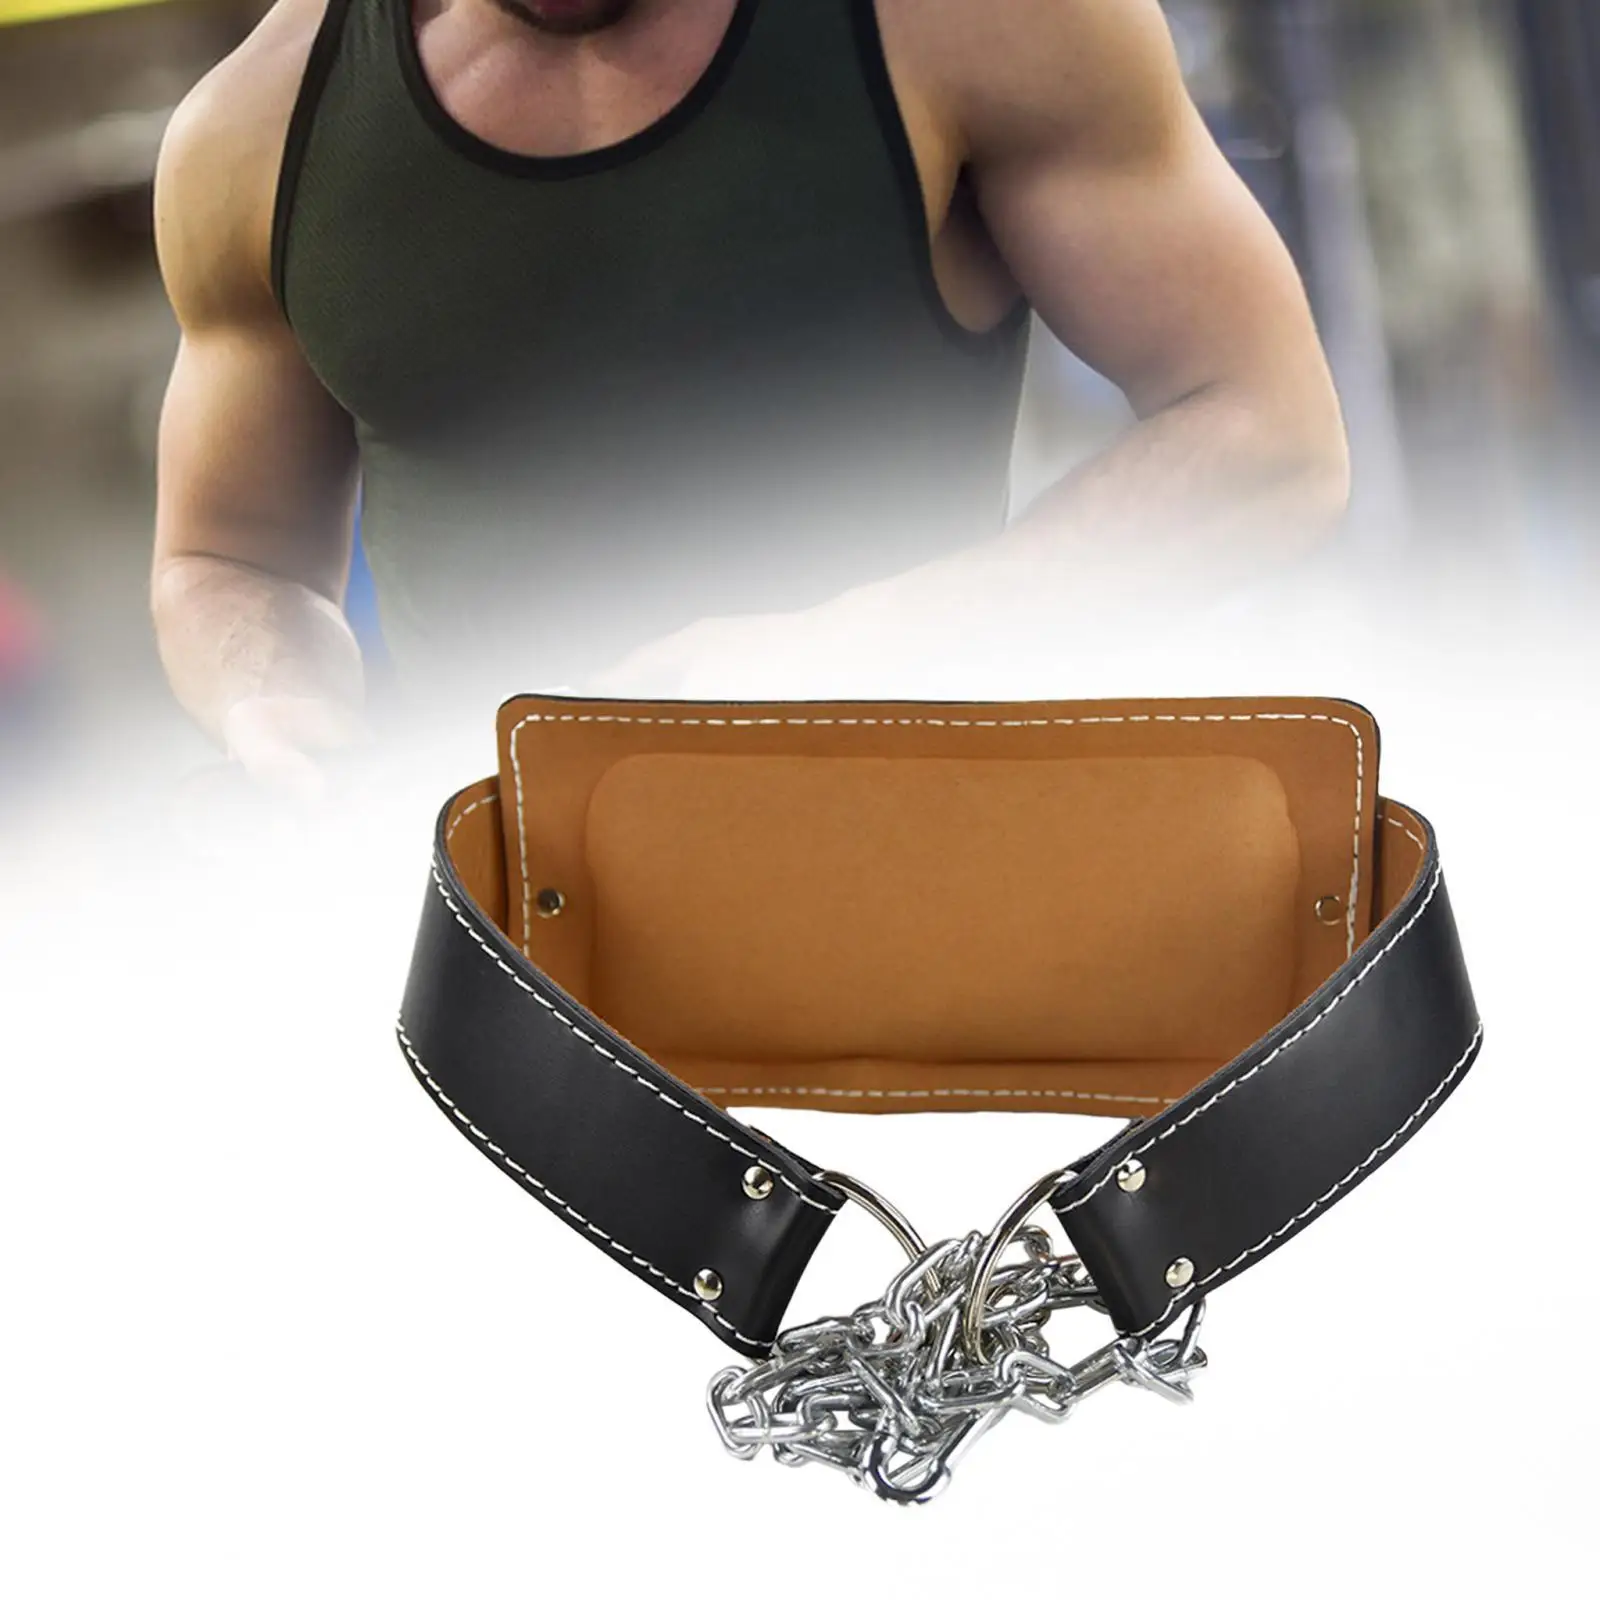 Weightlifting Dip Belt with Chain Workout Accessory Bodybuilding Fitness Belts Gym Belt Back Support for Men Women Training